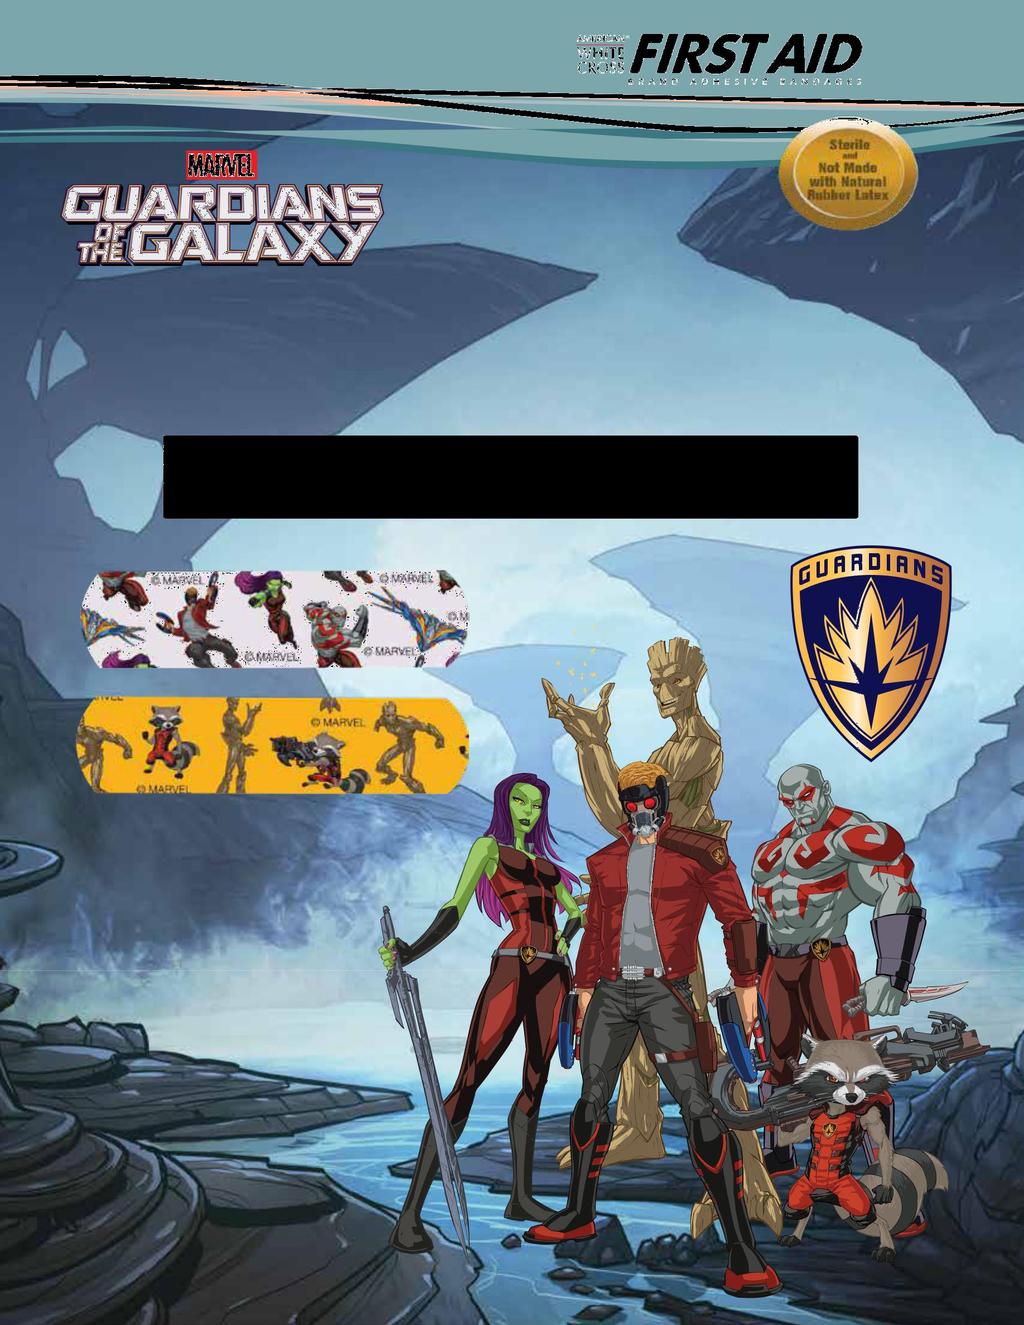 910.779.2334 Guardians of the Galaxy Guardians of the Galaxy Bandages feature Star-Lord, Gamora, Drax, Rocket, Groot and the Milano, on Stat Strip bandages.